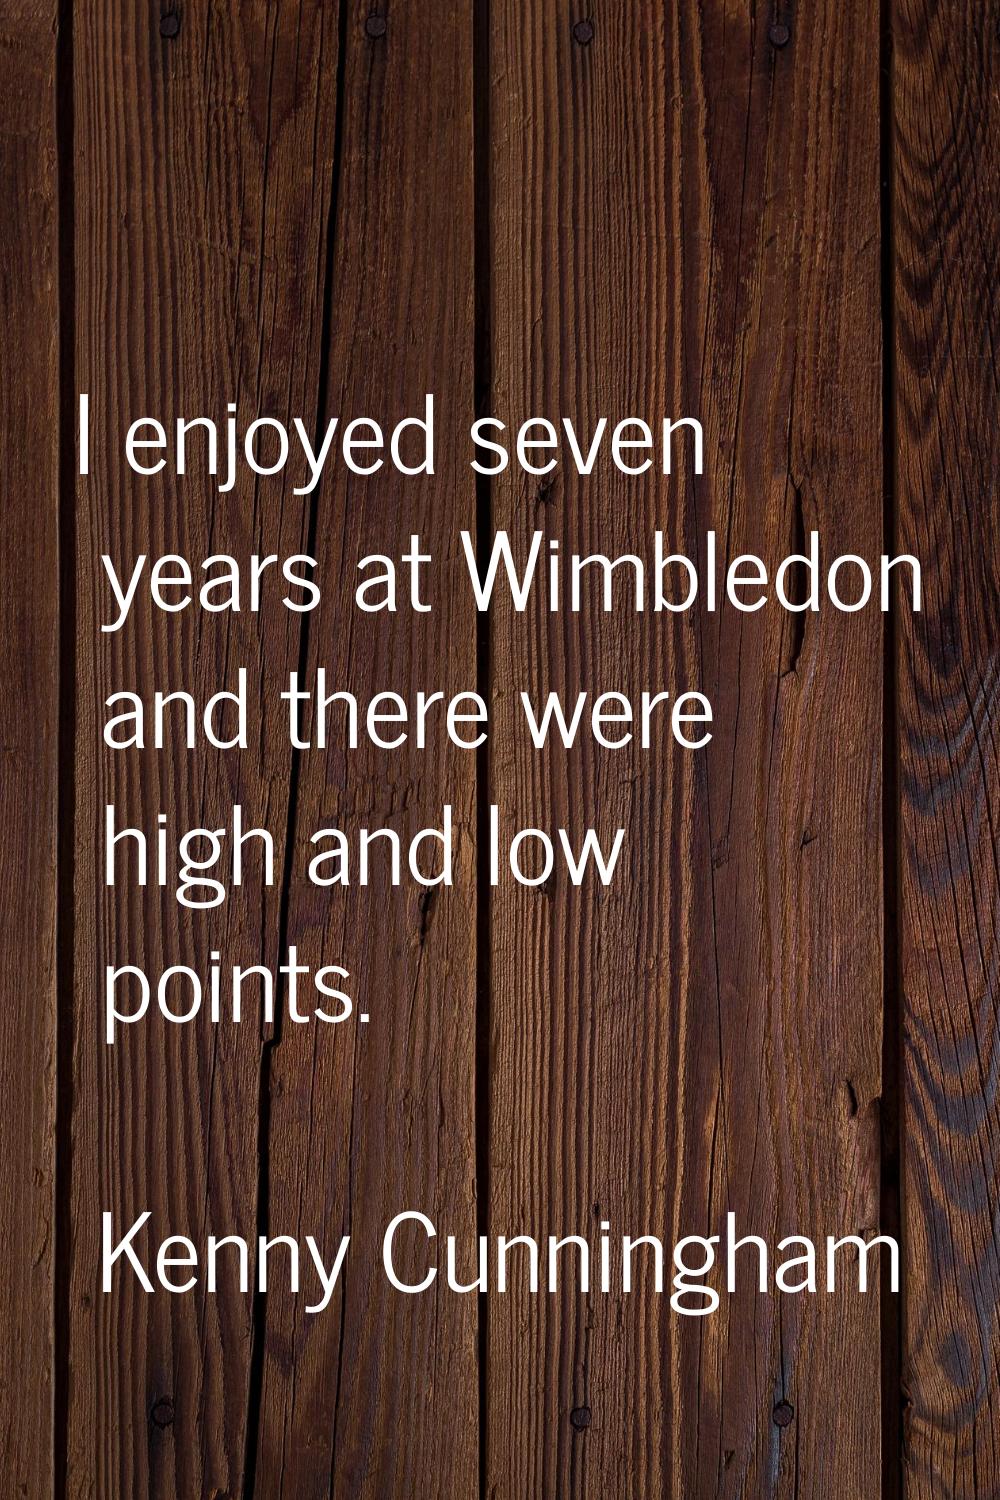 I enjoyed seven years at Wimbledon and there were high and low points.